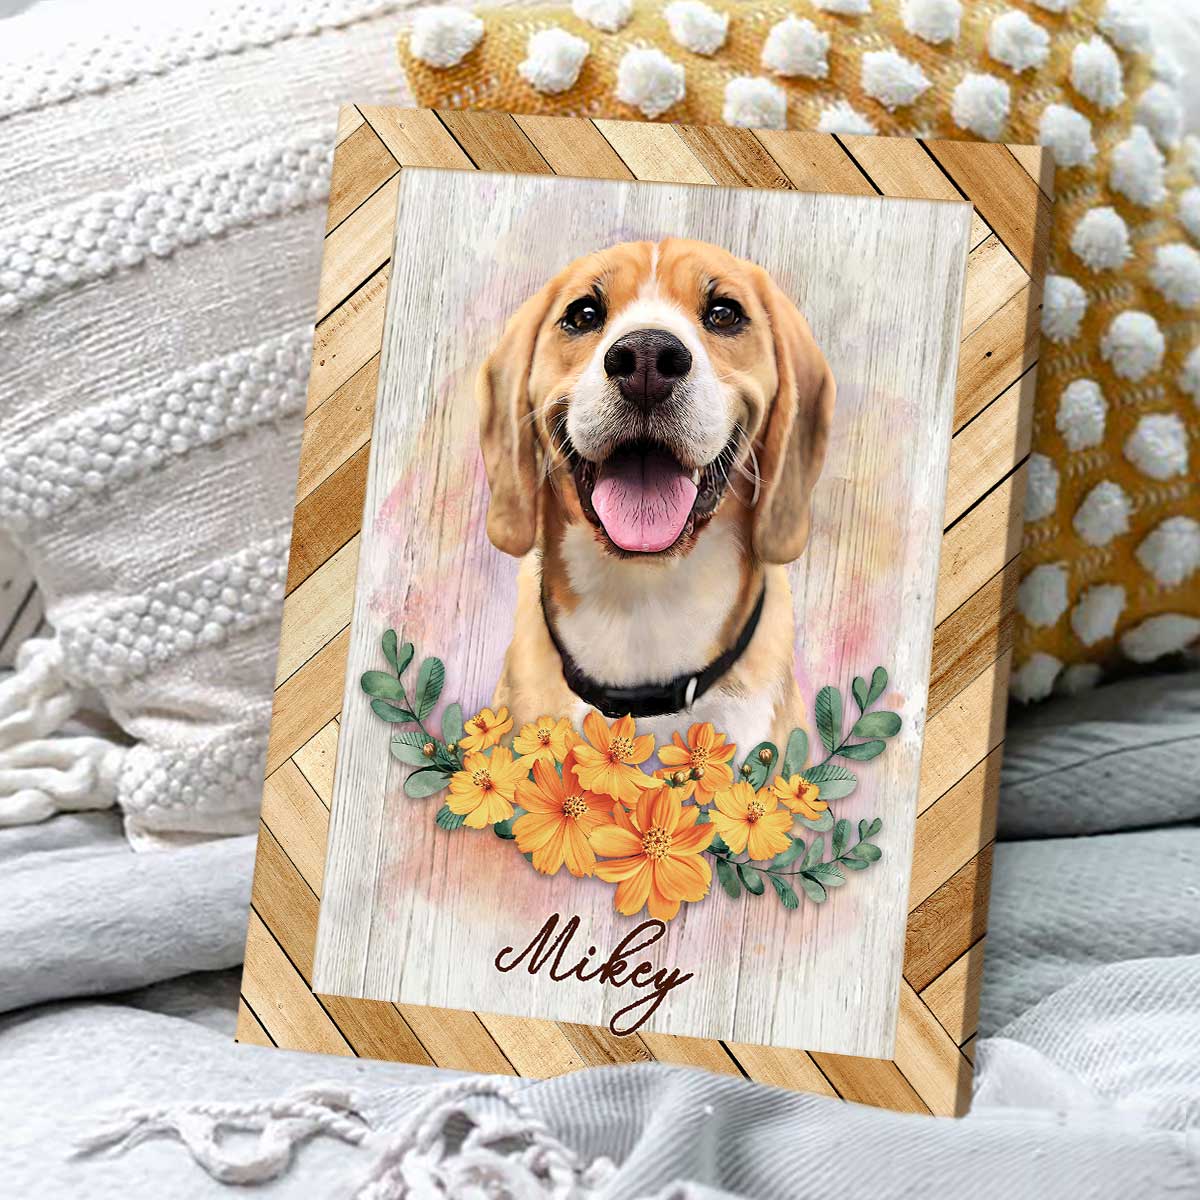 Custom Pet Portrait Canvas, Gifts For Dog Lovers, Pet Portrait With Yellow Flowers, Pet Memorials - Best Personalized Gifts for Everyone